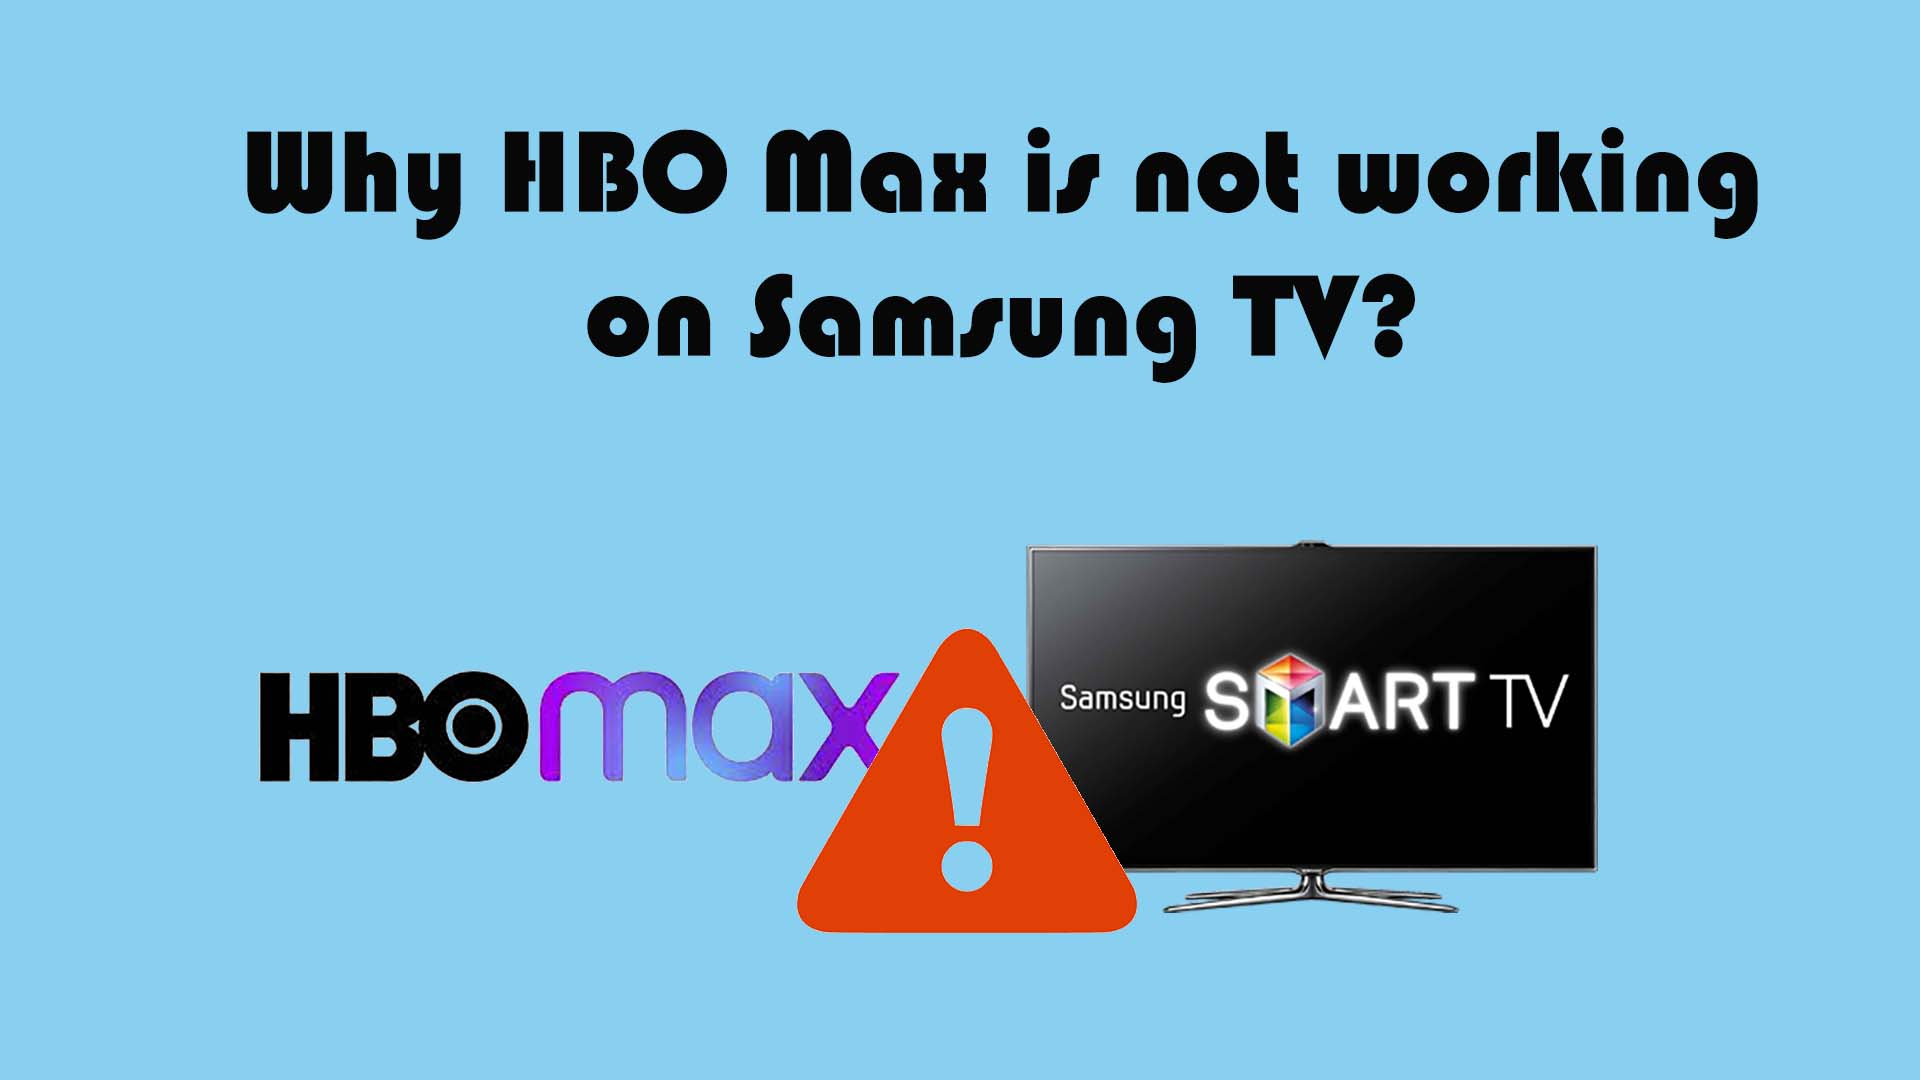 Reasons & Fixes for HBO Max App Not Working on Samsung TV